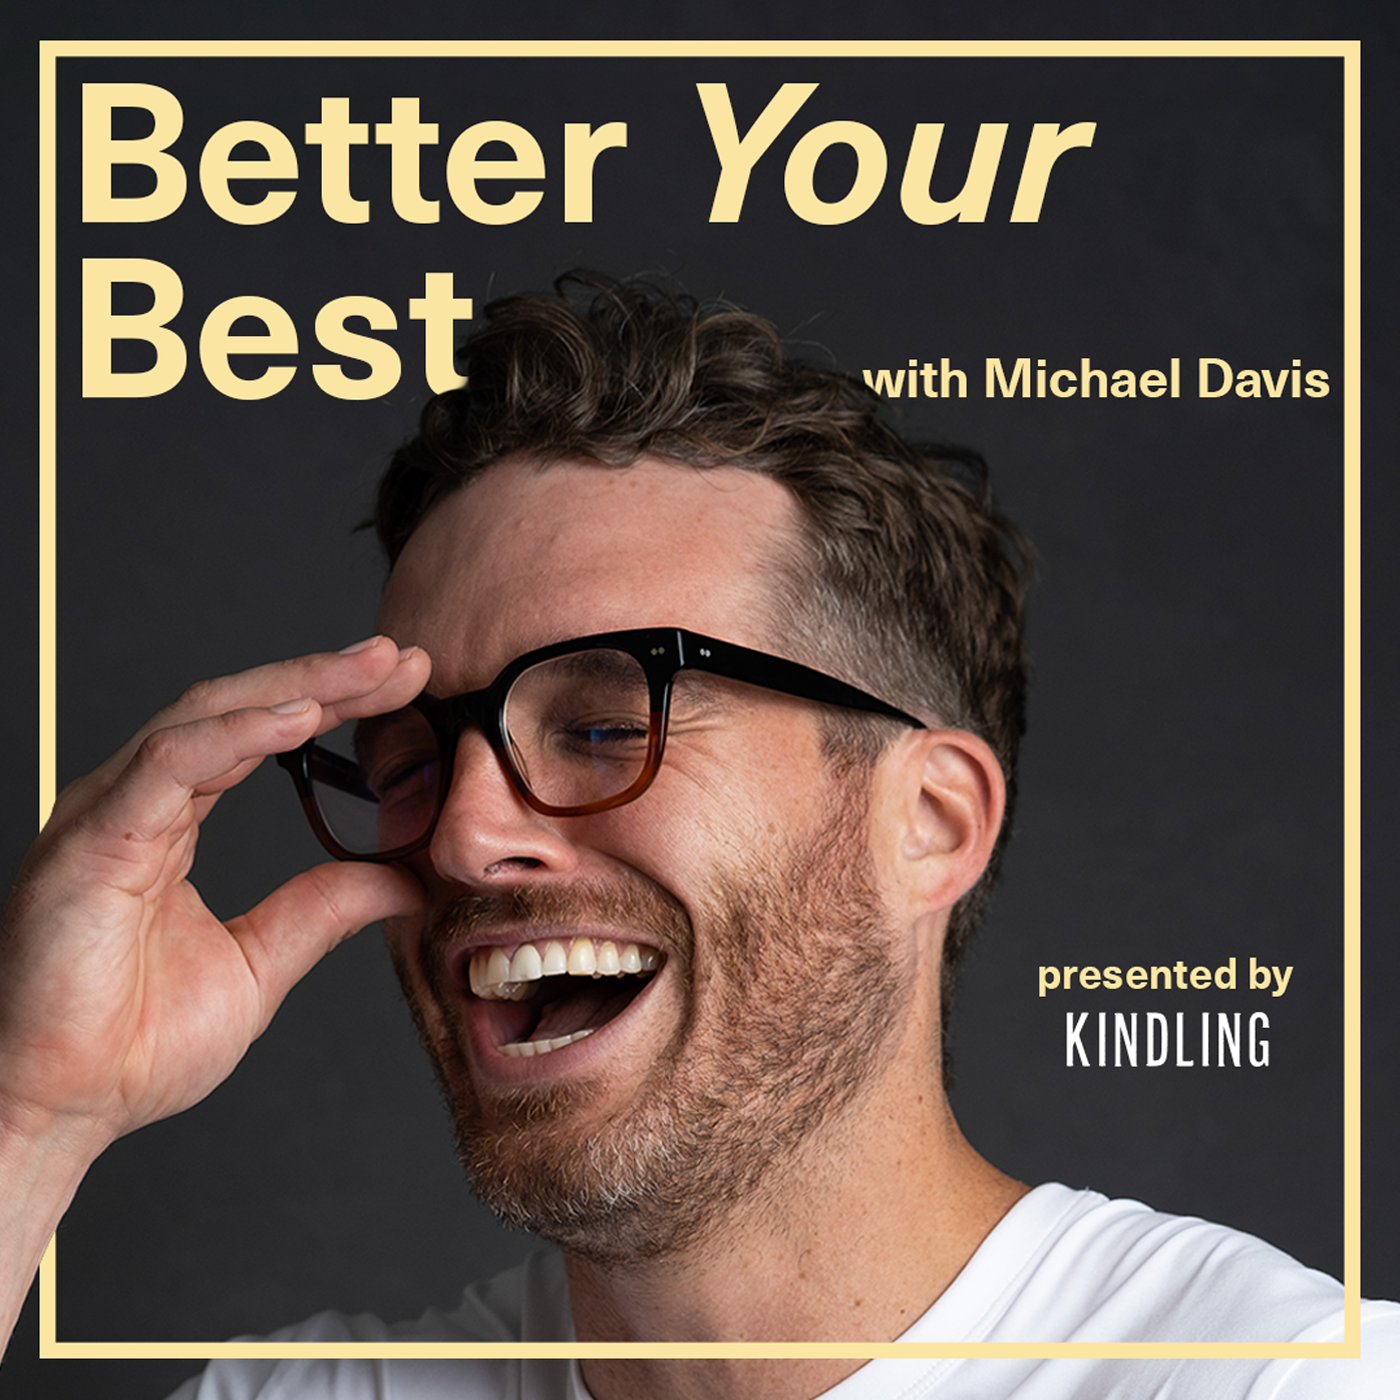 Better Your Best with Michael Davis